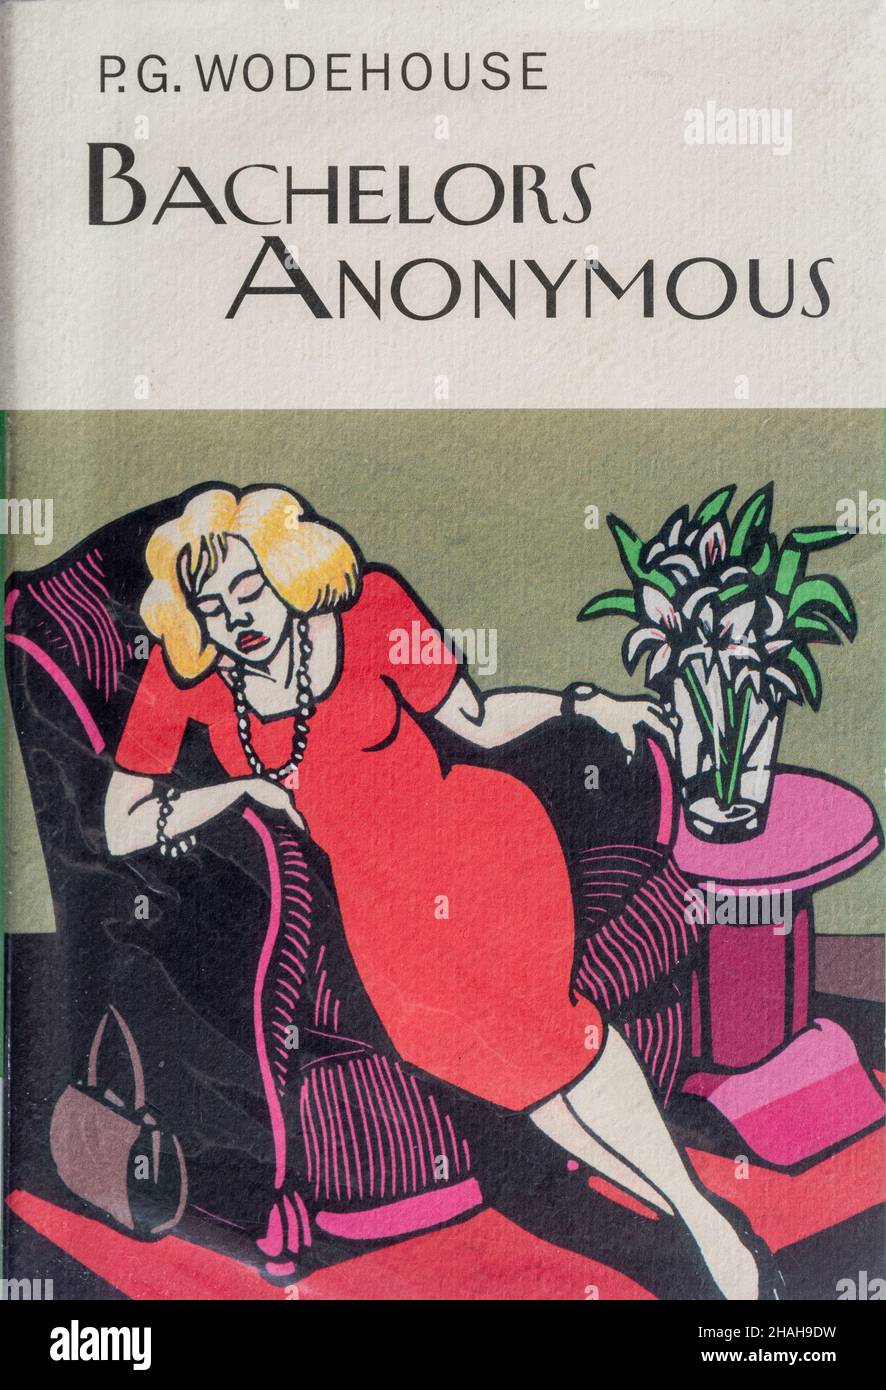 Bachelors Anonymous, book by P.G. Wodehouse Stock Photo